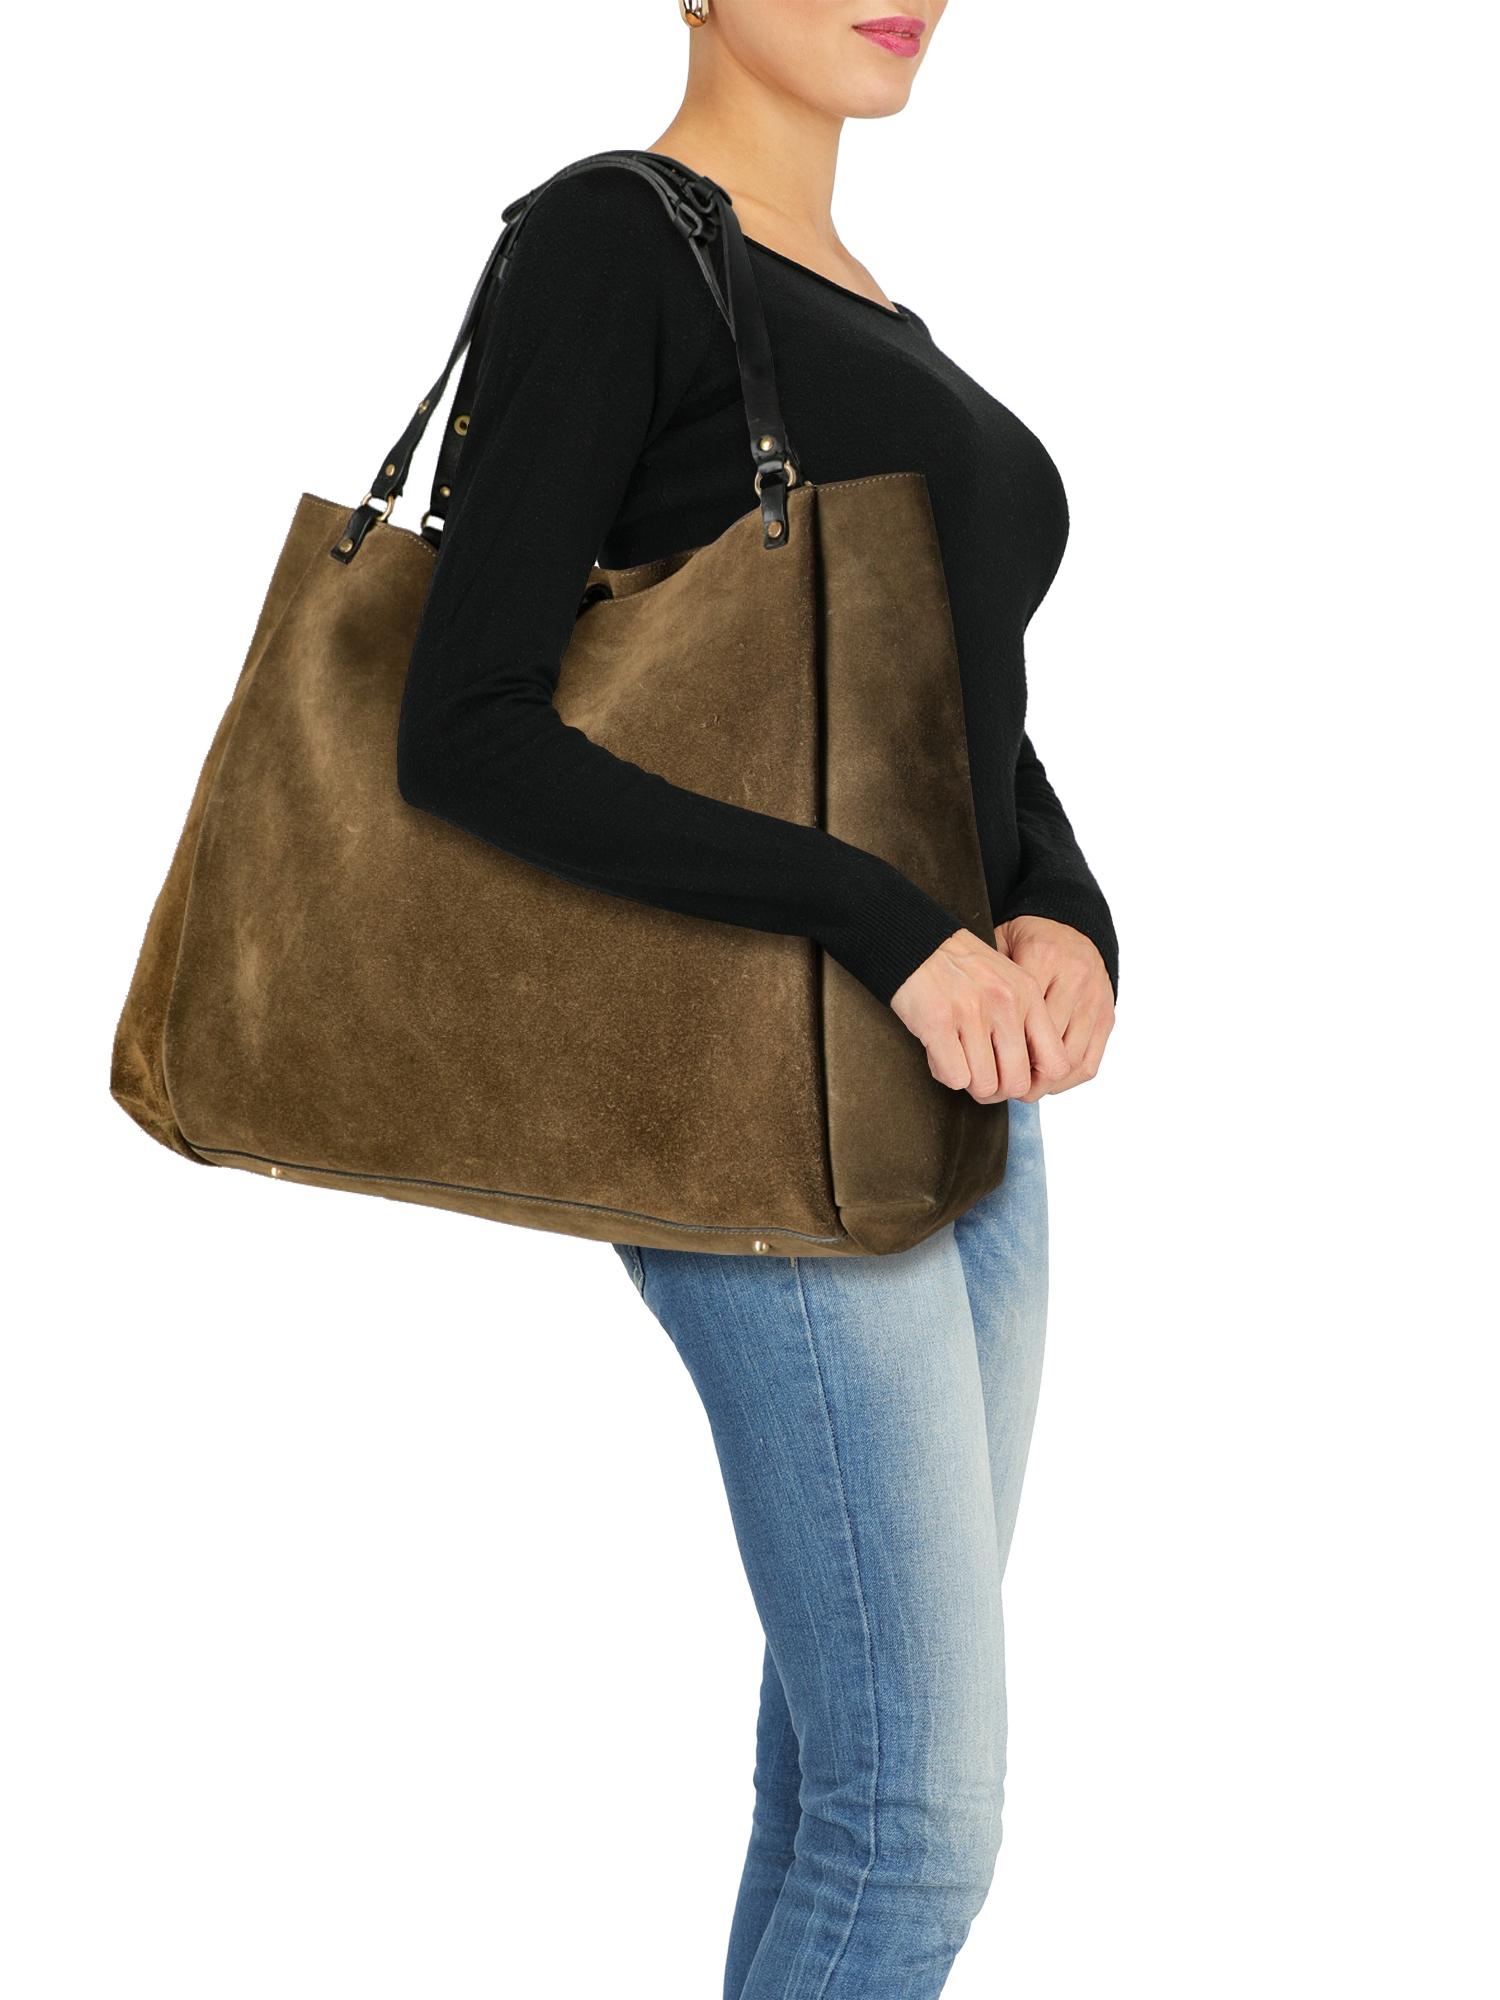 Tote bag, leather, solid color, internal logo, button fastening, internal zipped pocket, day bag

Includes:
- Dust bag

Product Condition: Very Good
Lining: slightly visible scratches. Hardware: negligible scratches. Corners and edges: slightly